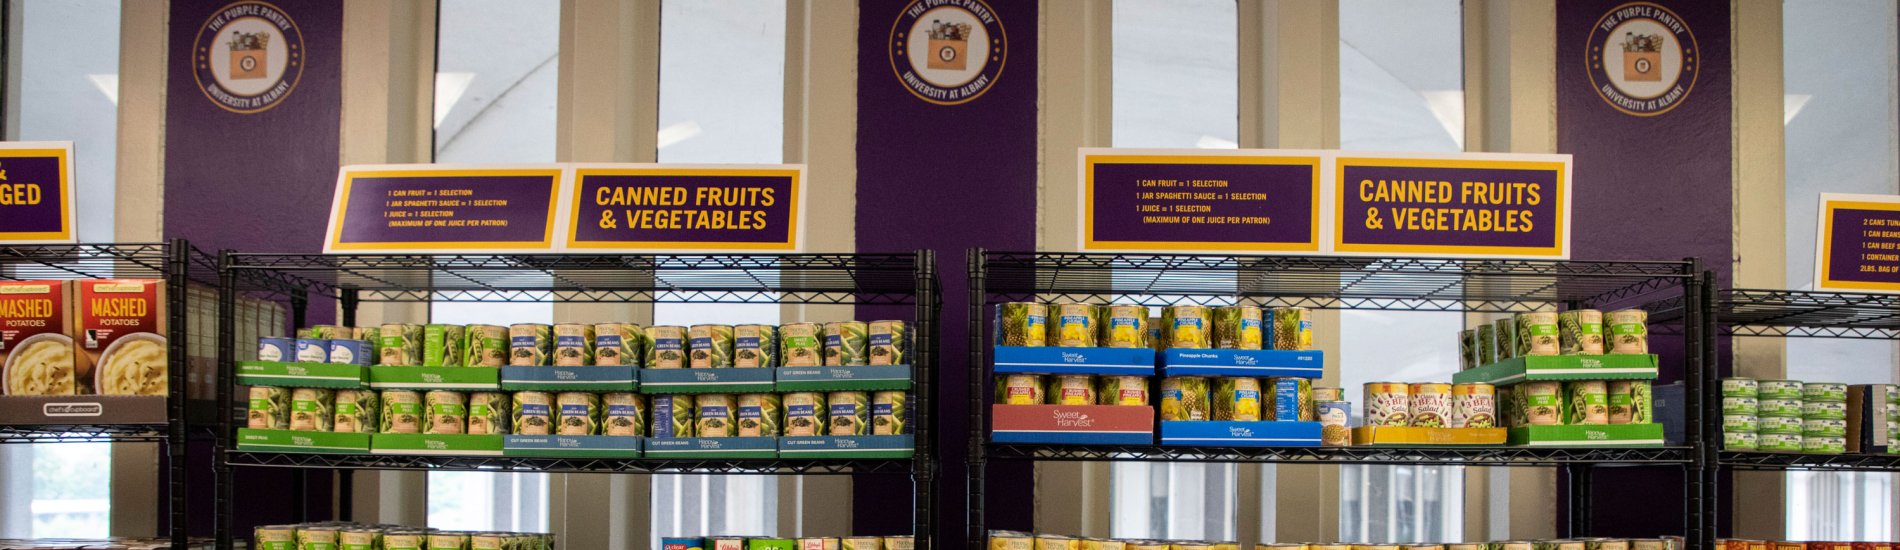 Shelves stocked with canned fruit and vegetables inside the Purple Pantry. Signs show the Purple Pantry logo and instructions for community members.